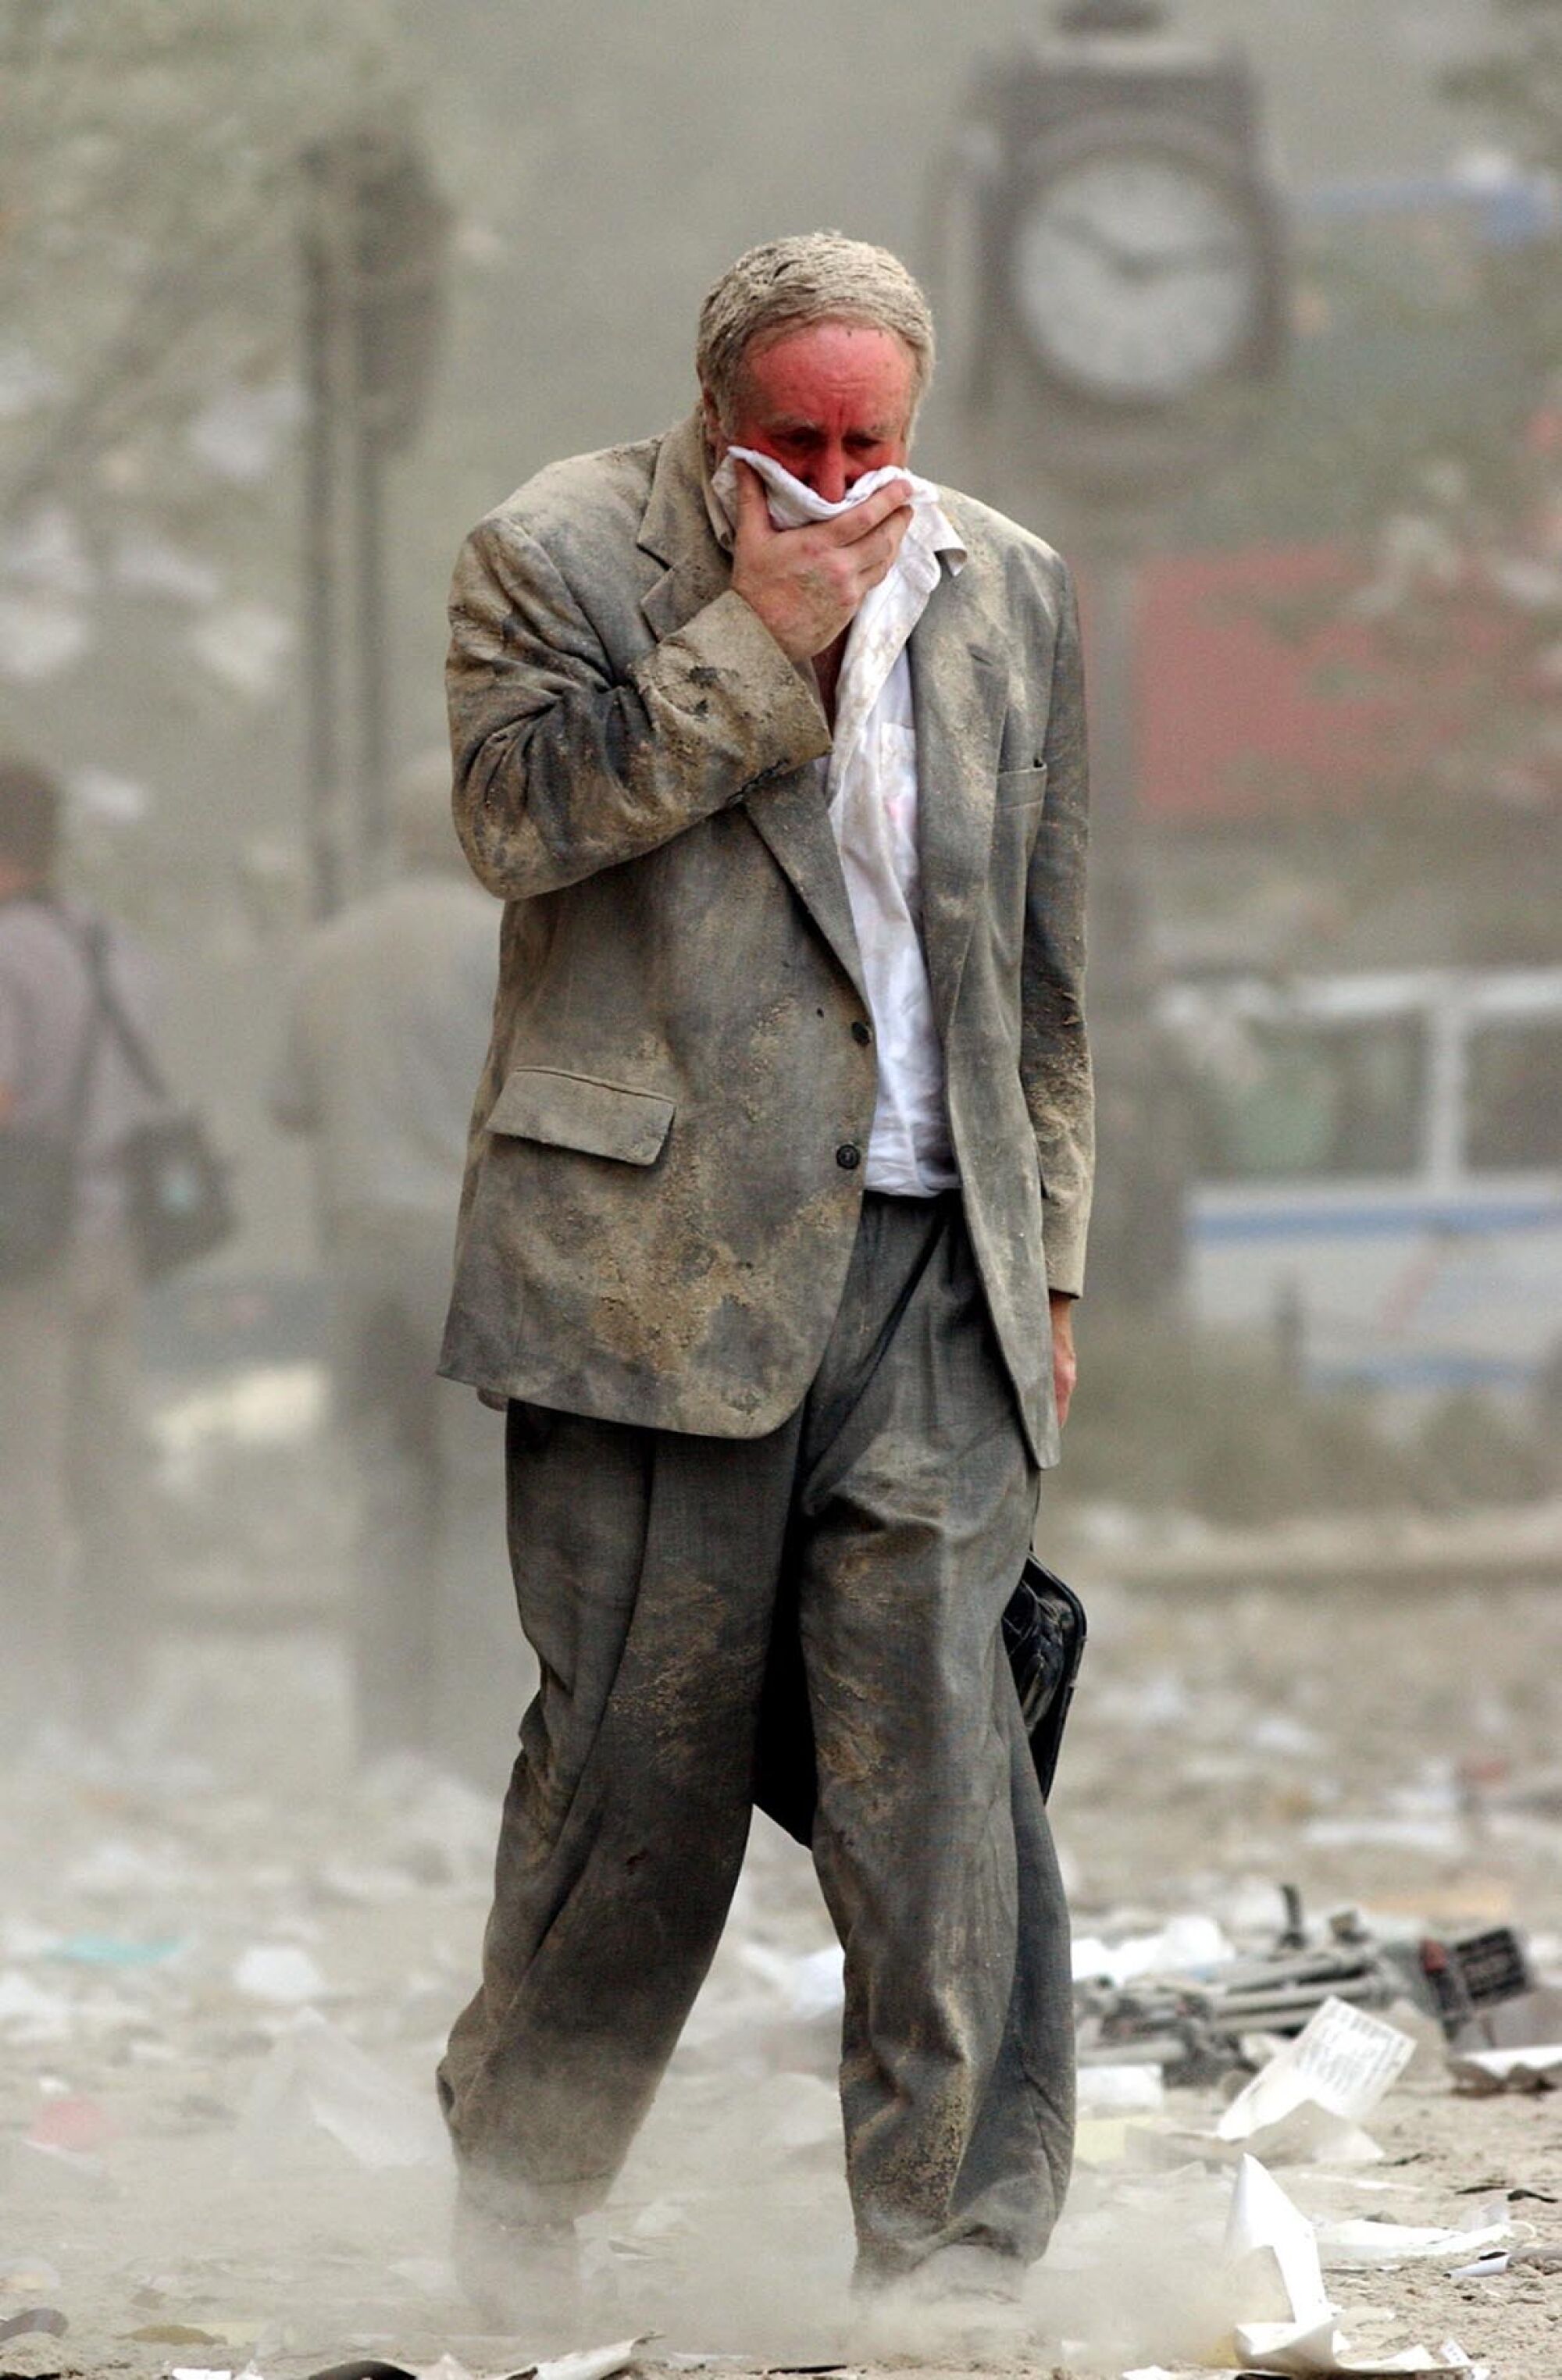 A man covers his mouth as he walks amid dust and debris